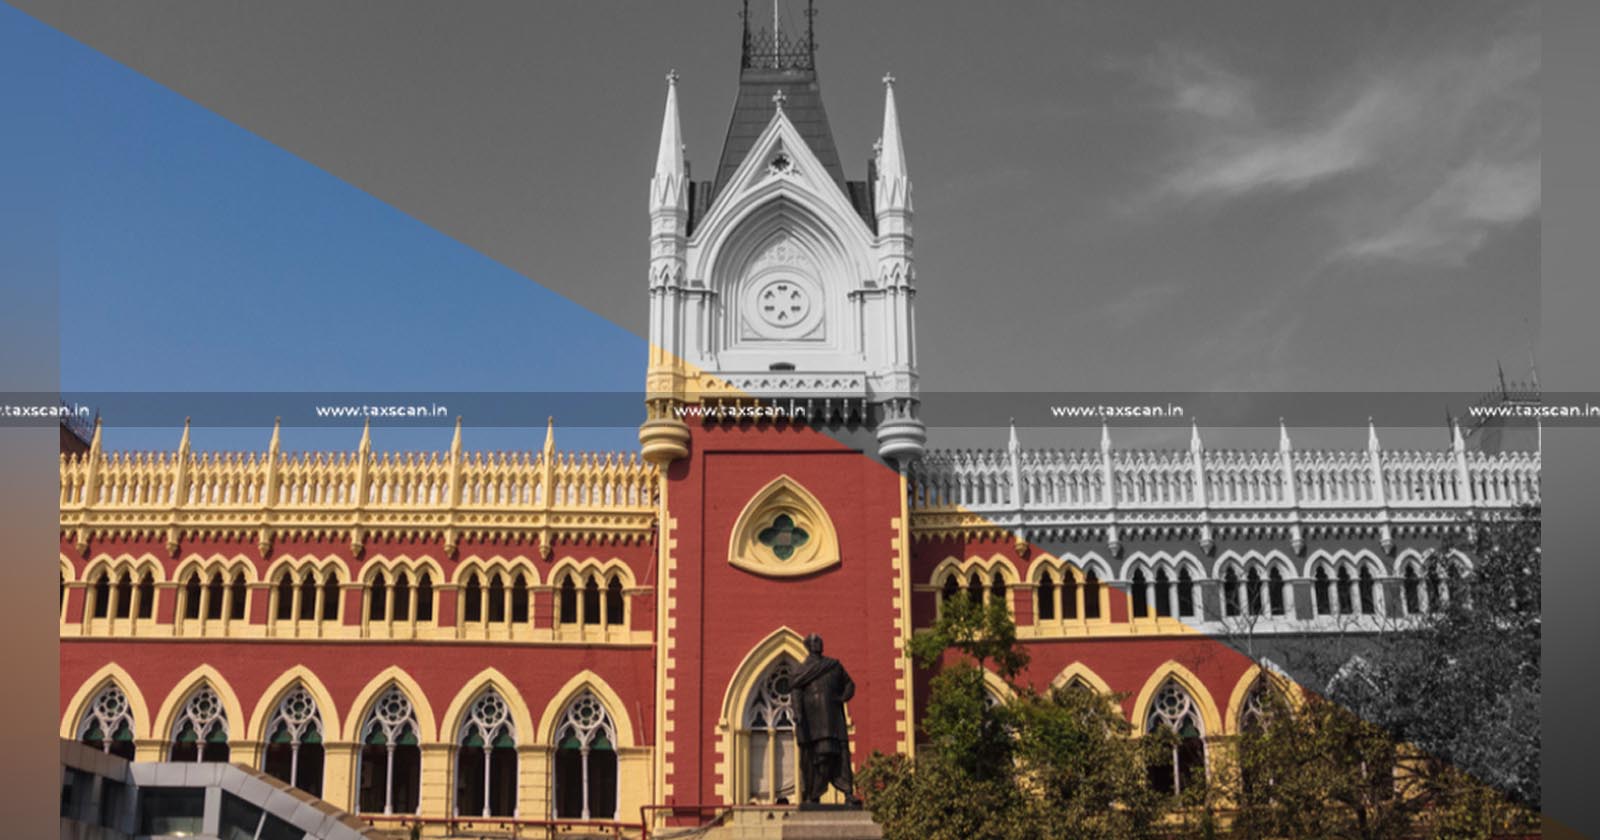 Deduction - Handling Charges - Calcutta High Court - C Forms - Taxscan